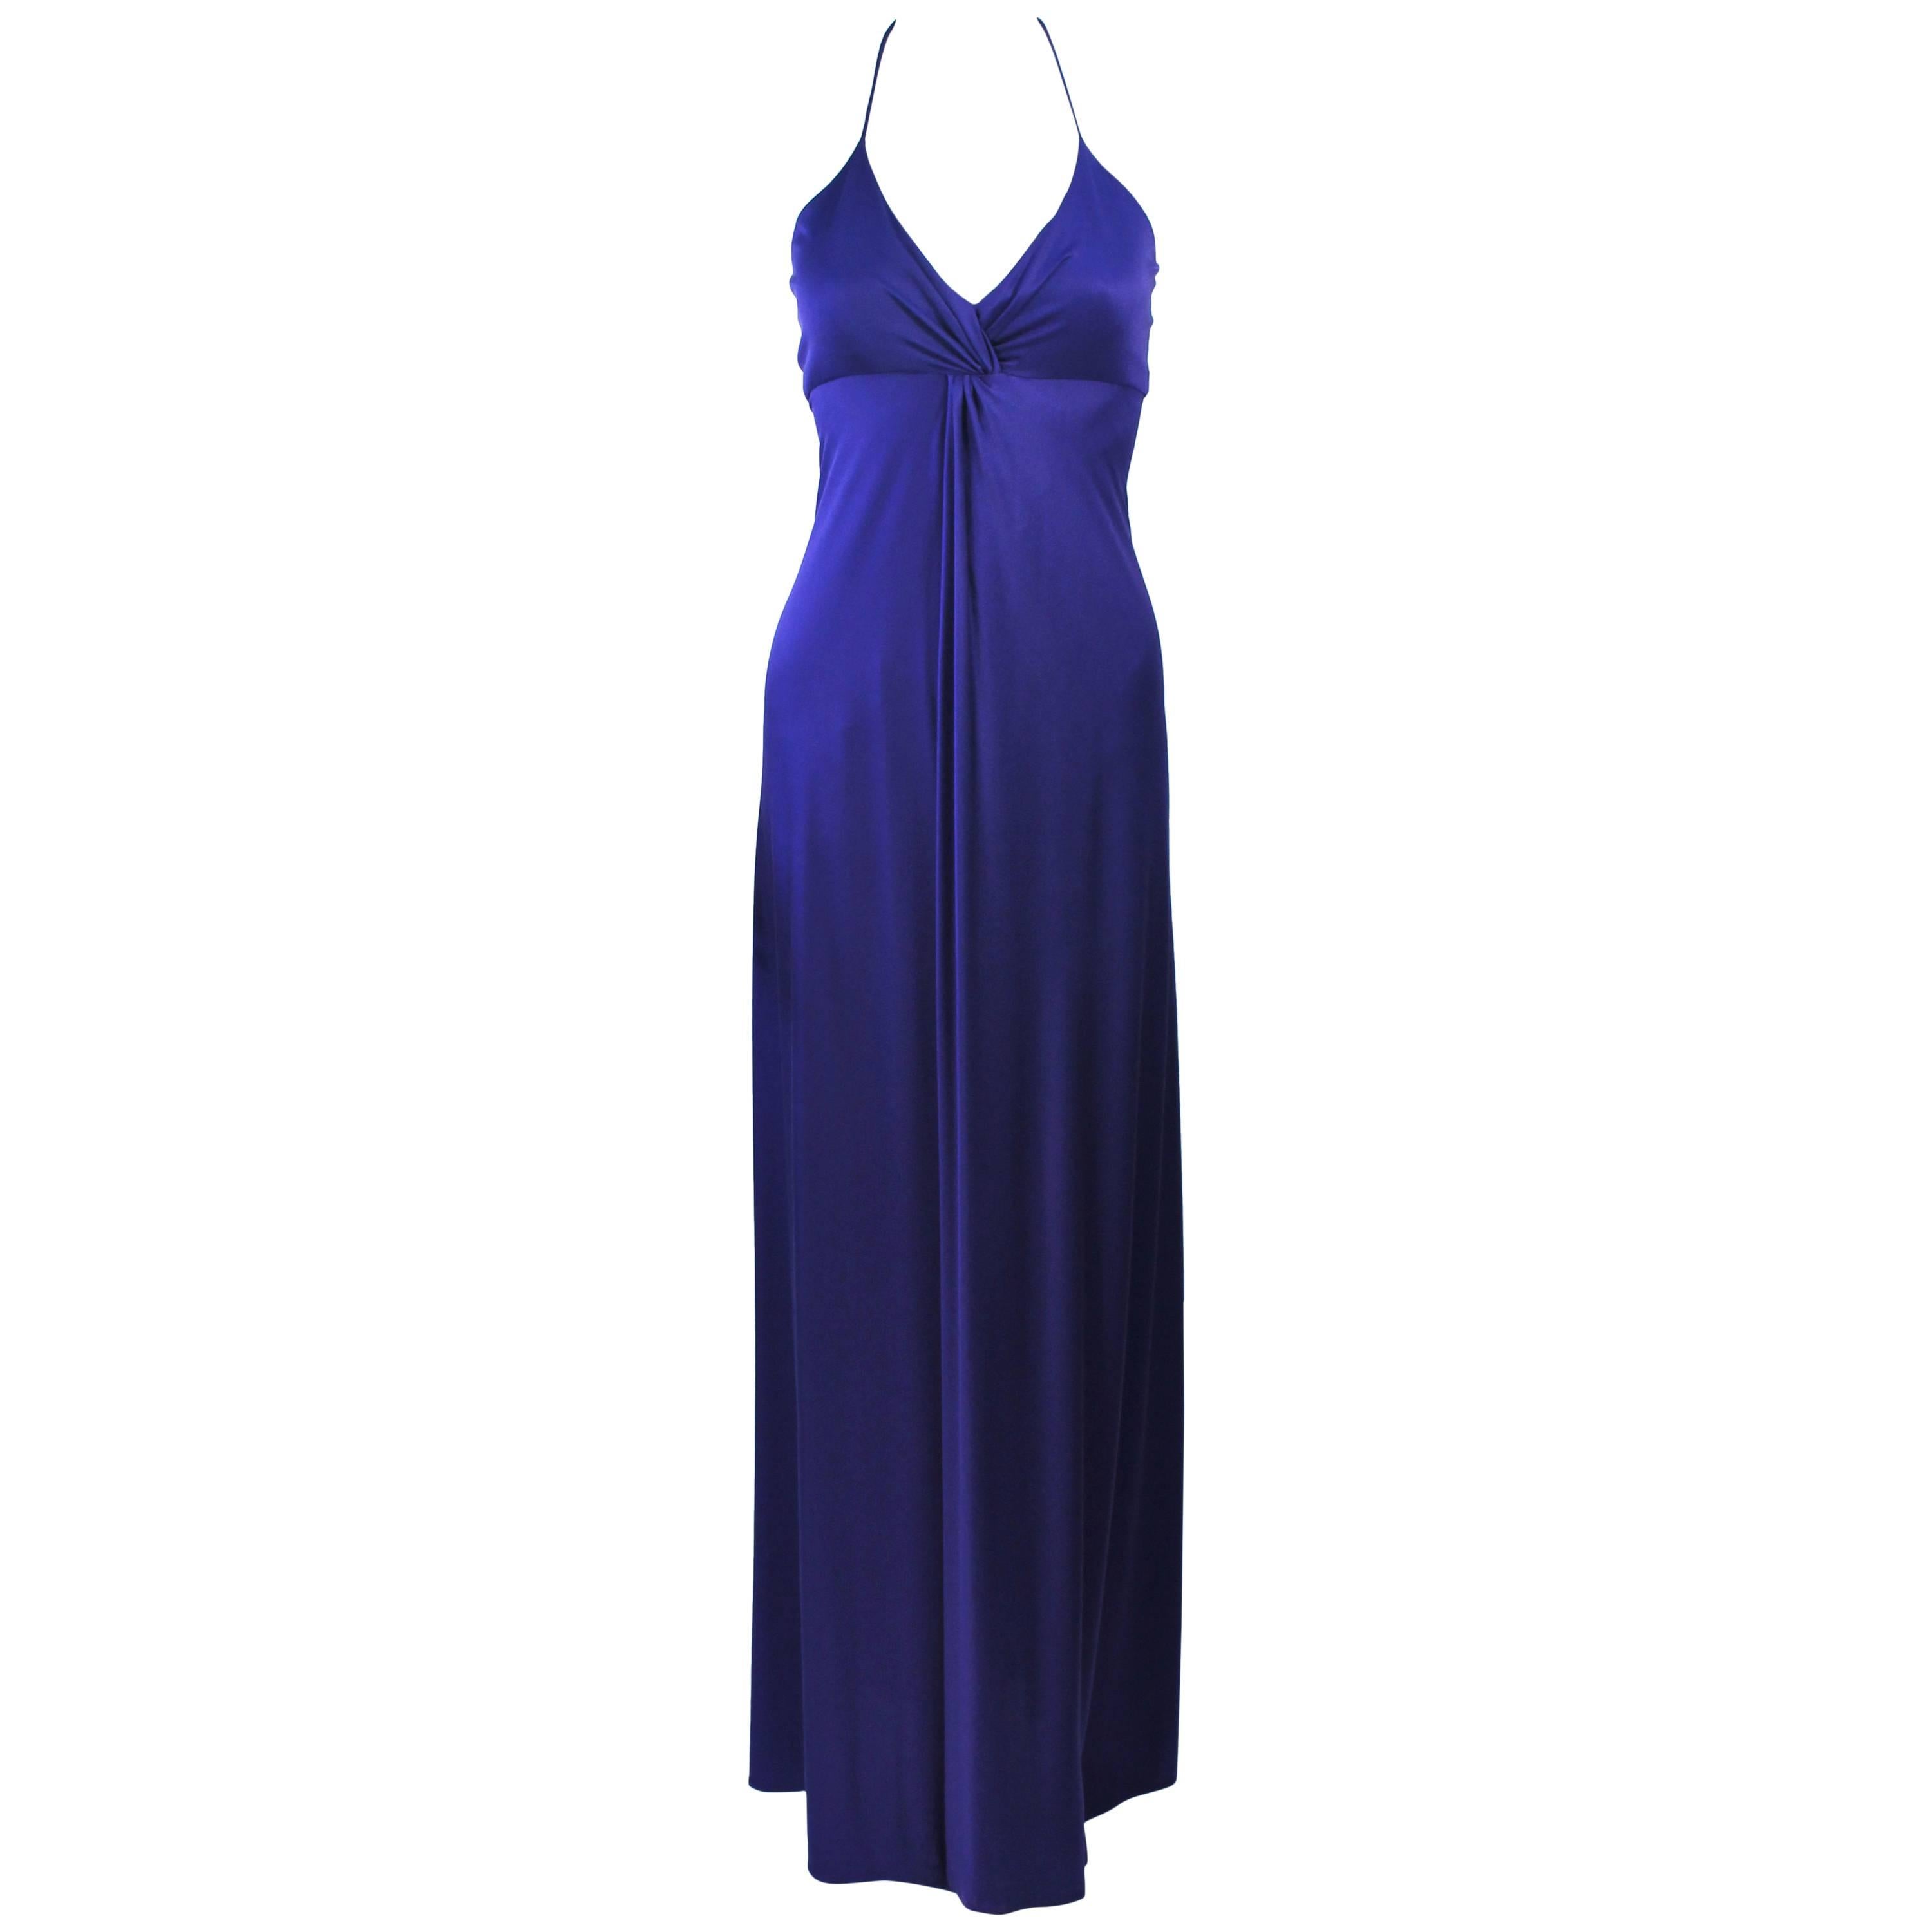 ELIZABETH MASON COUTURE Purple Silk Jersey Draped Halter Gown Made to ...